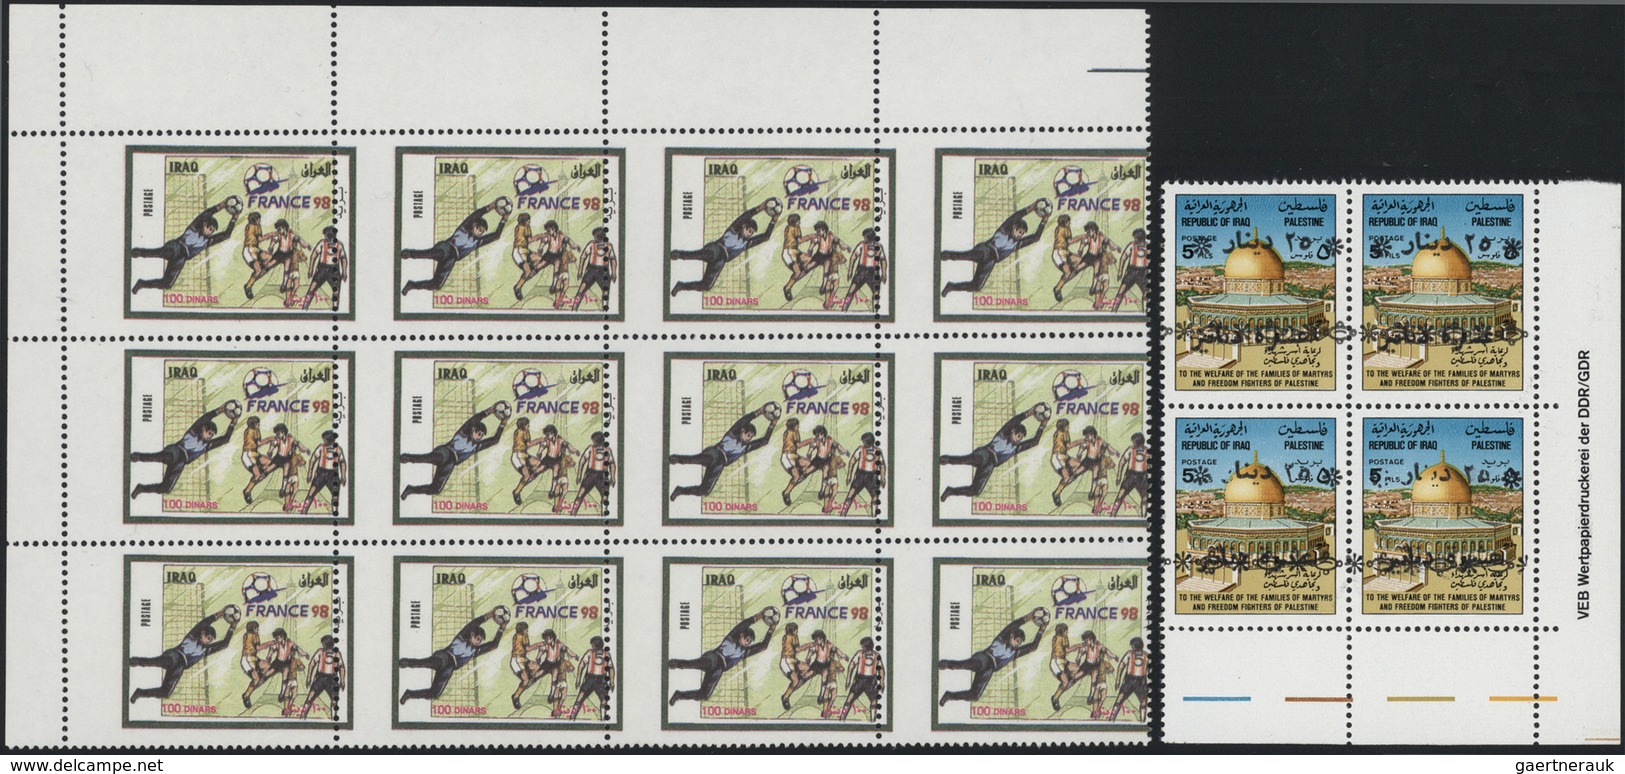 22795 Irak: 1940-2000, Large Album Containing Early Complete Sheets Postage And Service Stamps, Overprinte - Iraq